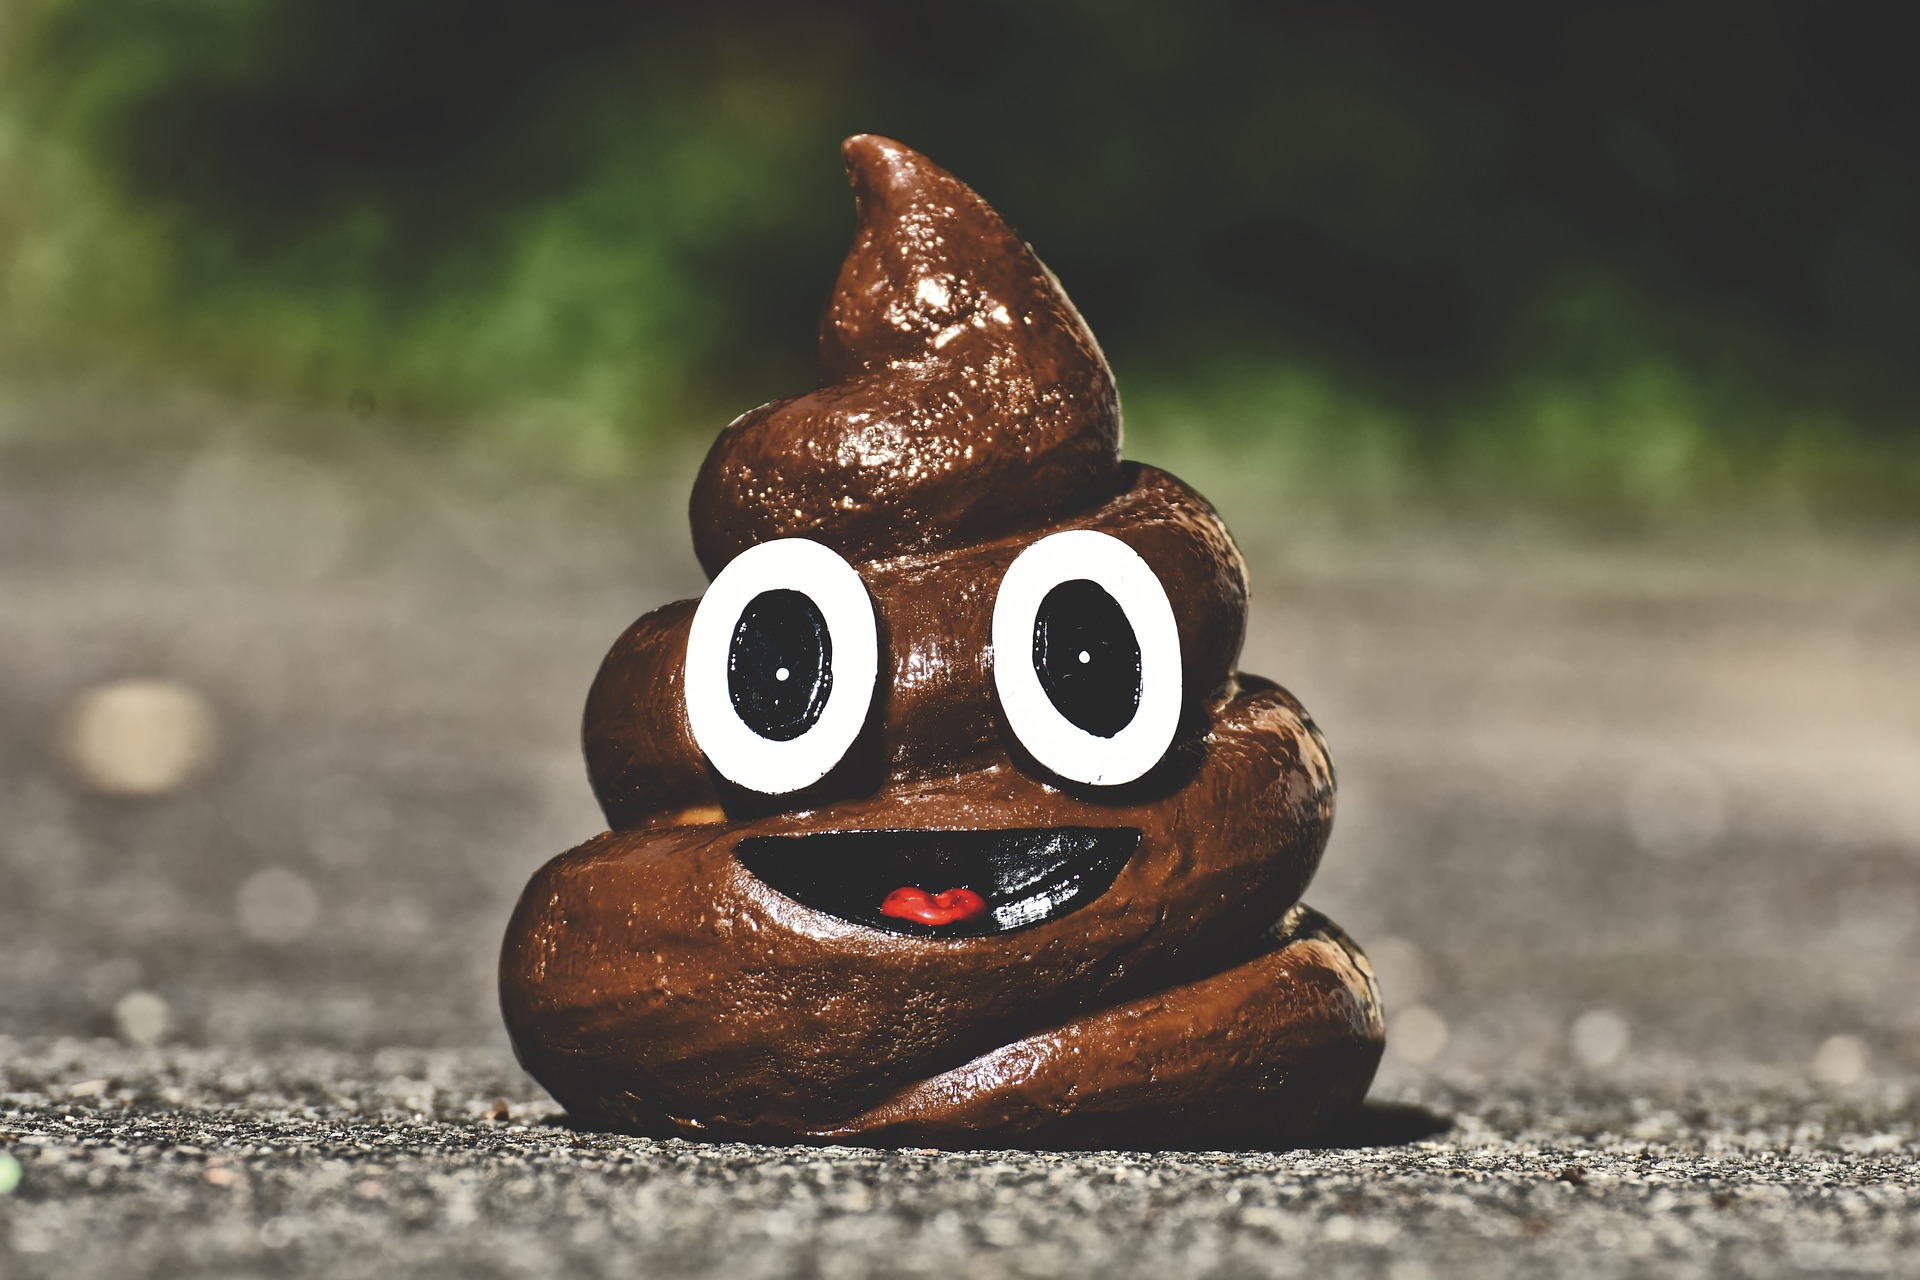 25. I’ll take any excuse to use this smiling poop picture.